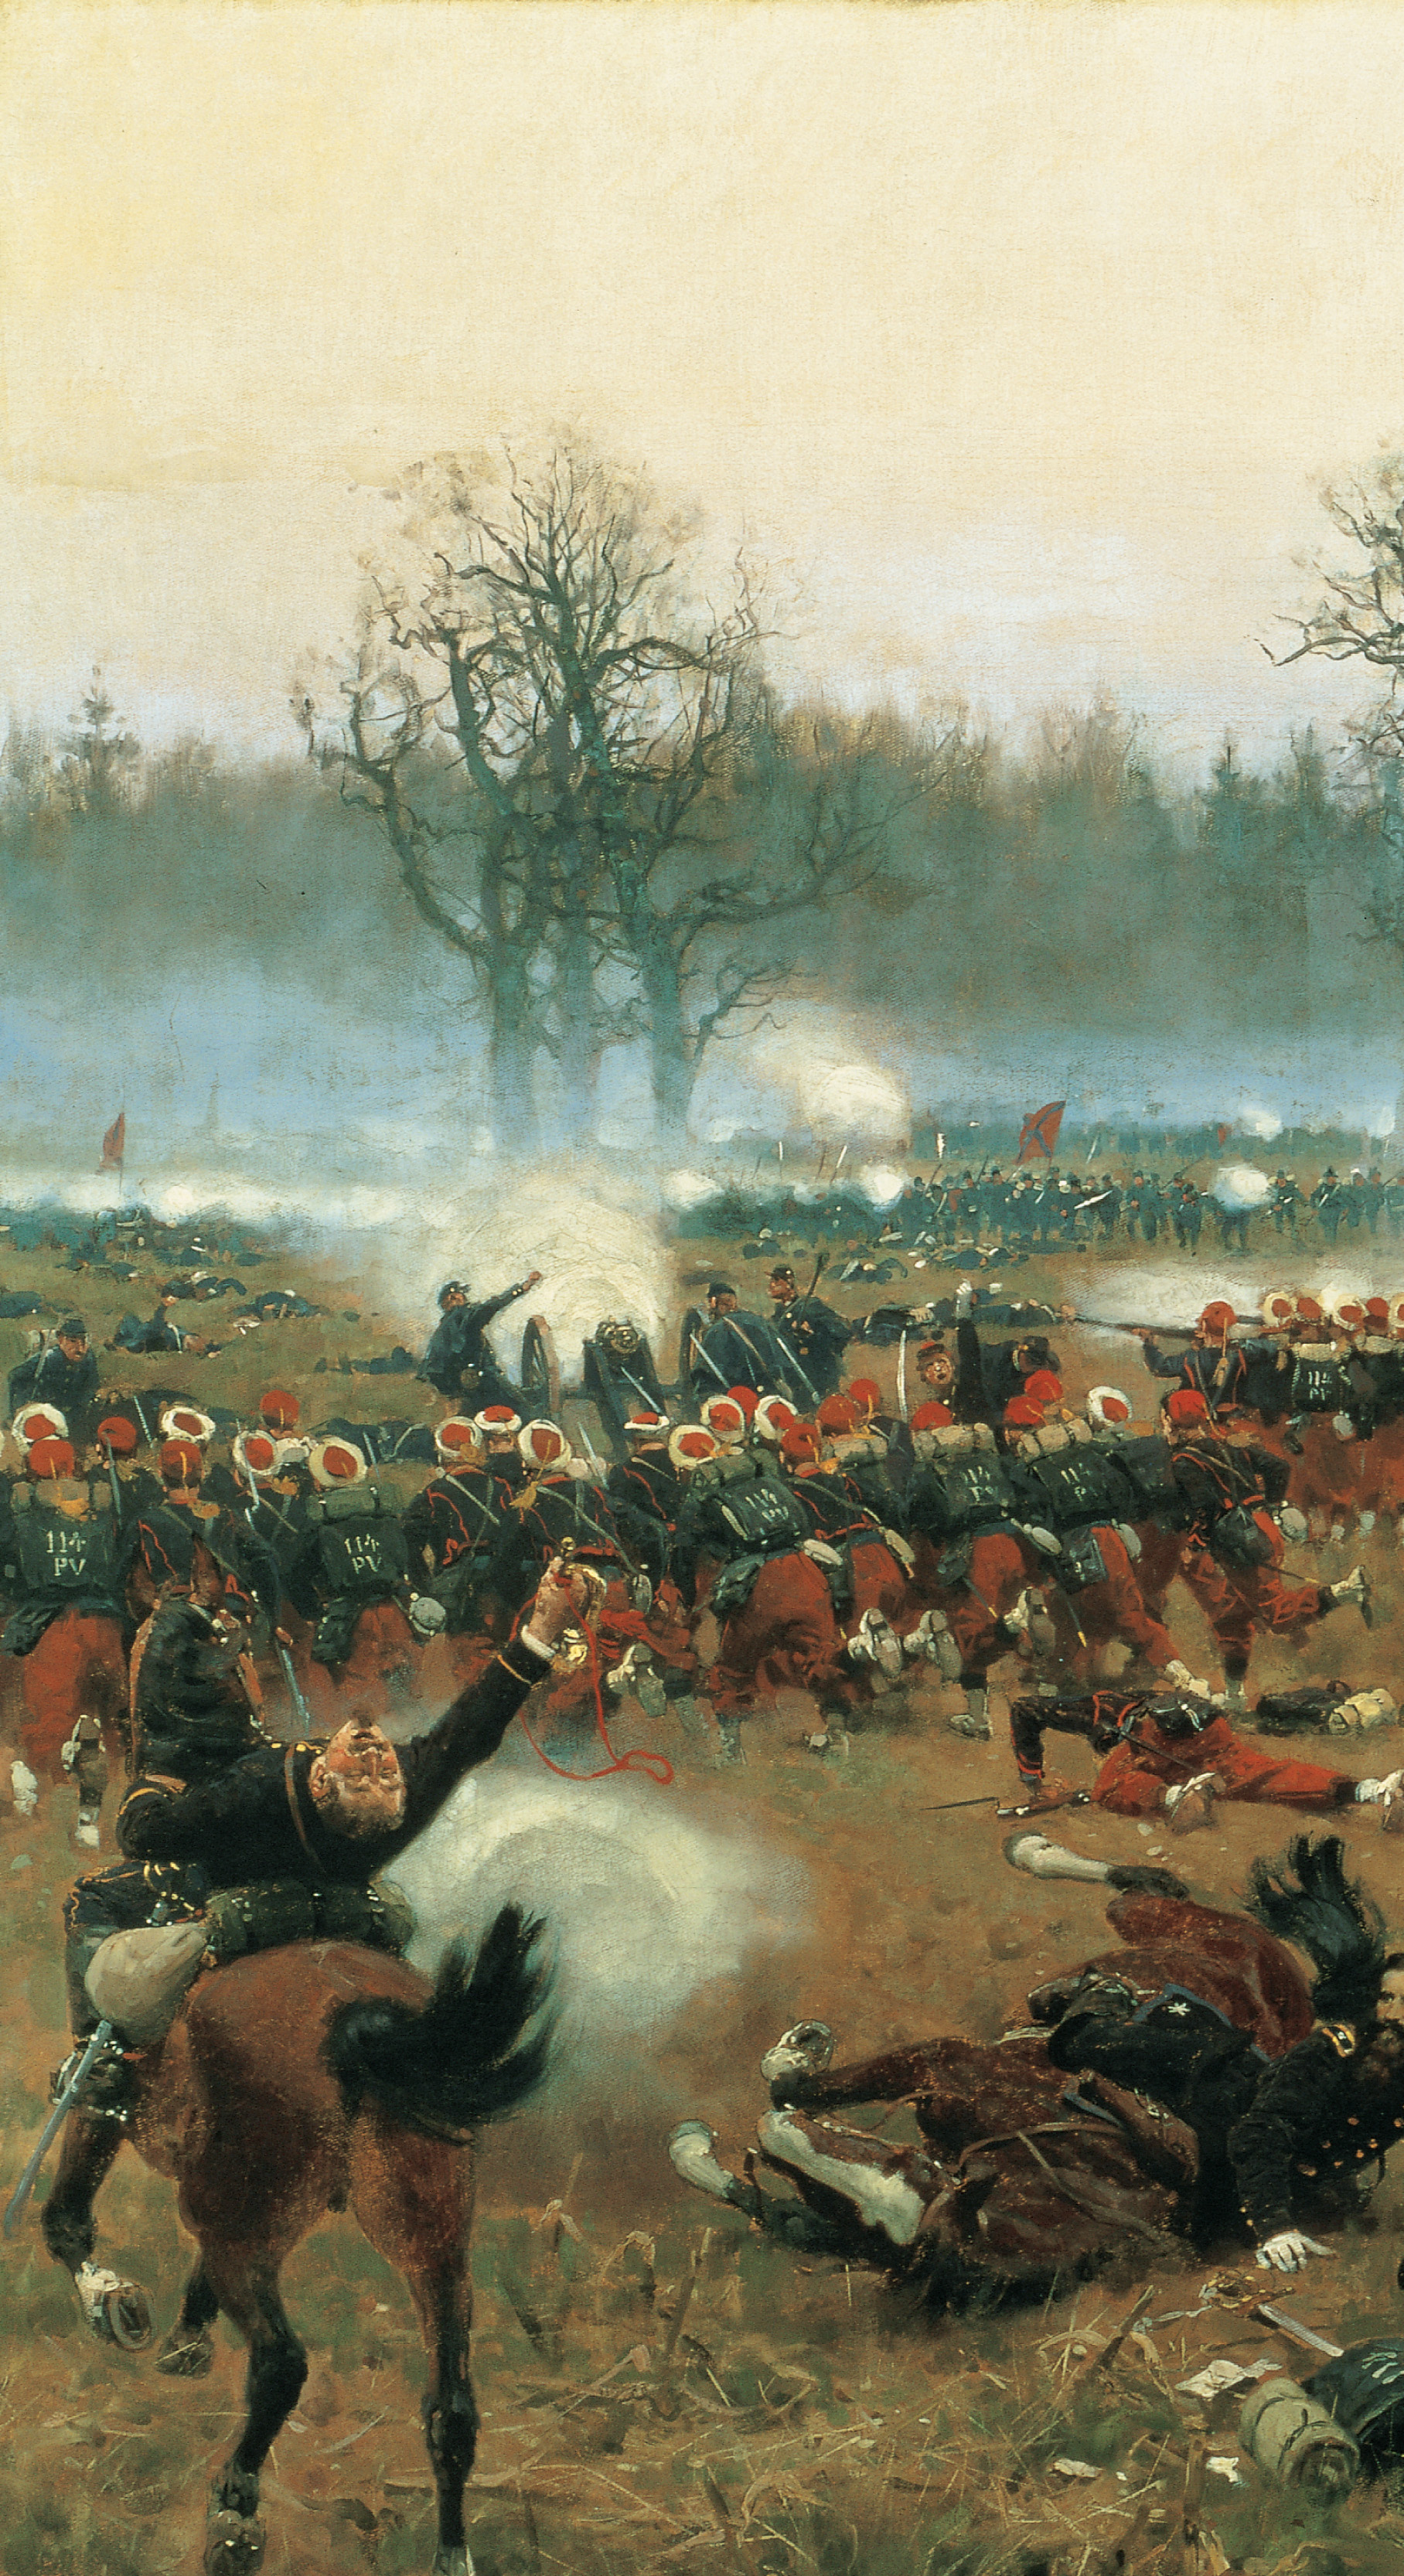 In a
painting of a battle, soldiers fire cannons at charging troops brandishing bayonnetted rifles. A man
on horseback waves a tattered American flag.